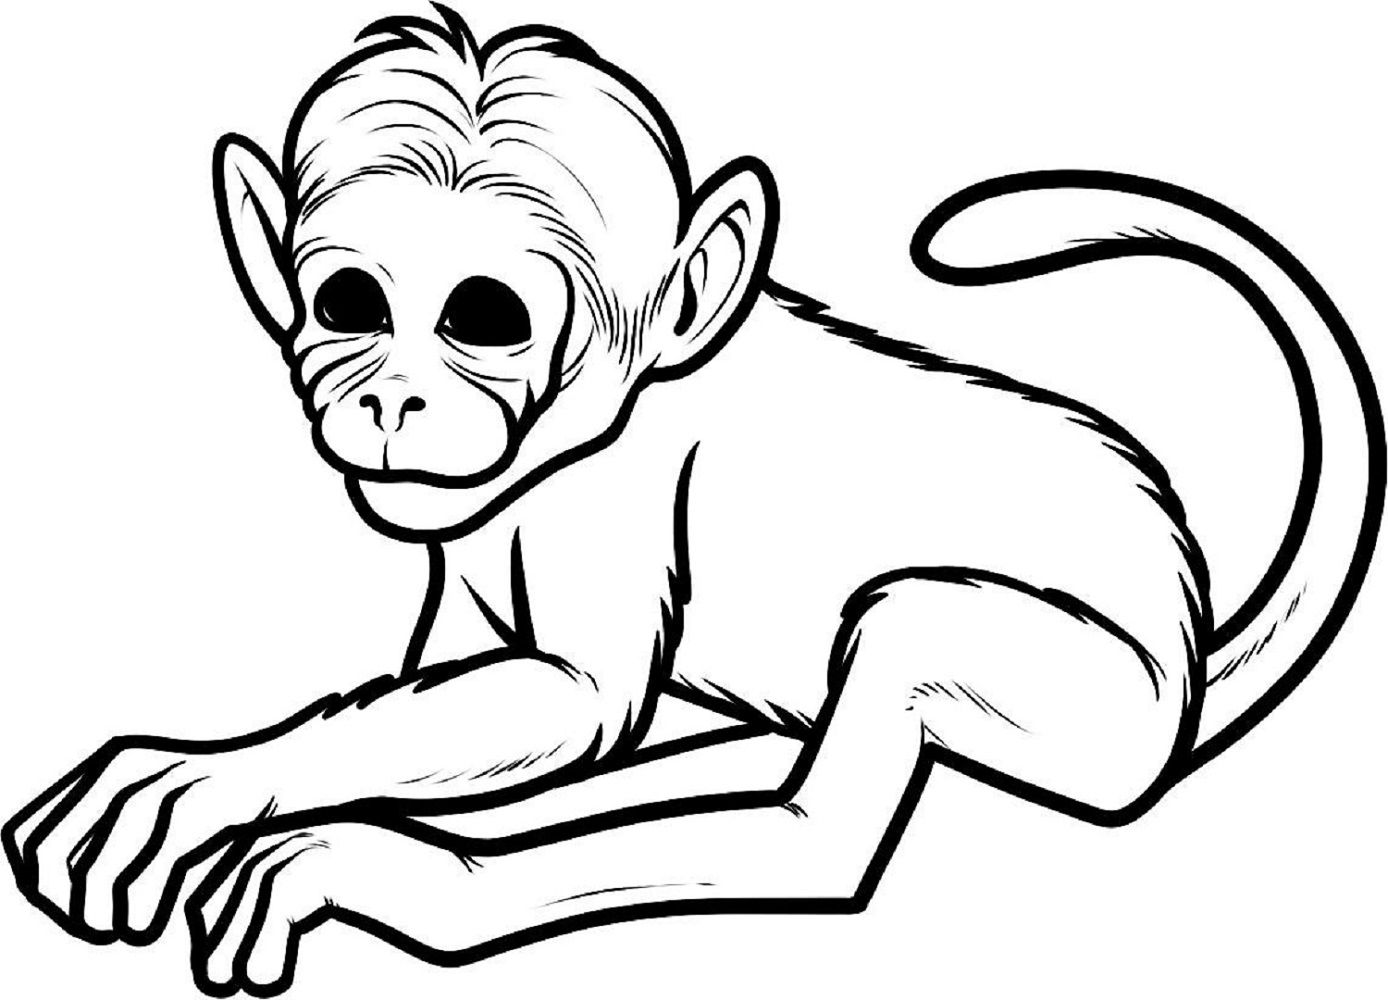 pictures of monkeys to color coloring pages of cute baby monkeys at getcoloringscom to color pictures monkeys of